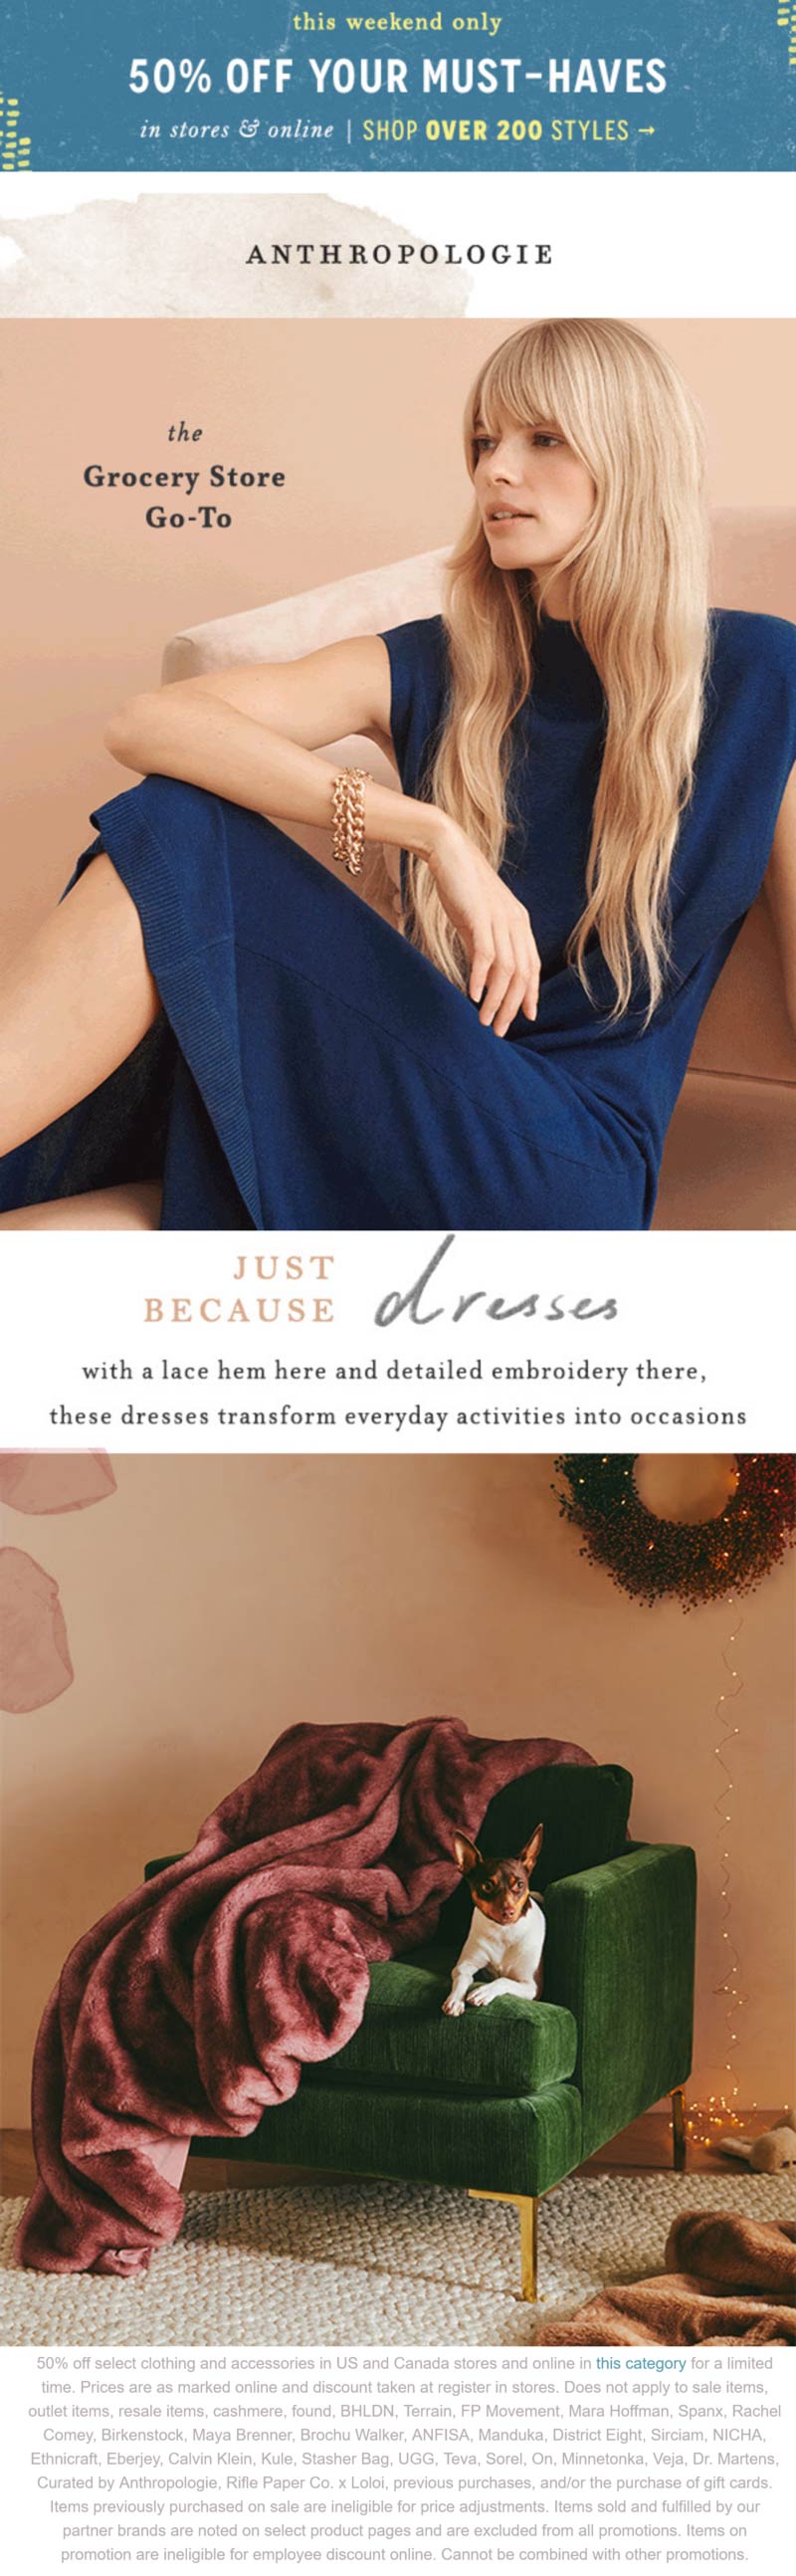 Anthropologie stores Coupon  50% off must-haves at Anthropologie, ditto online #anthropologie 